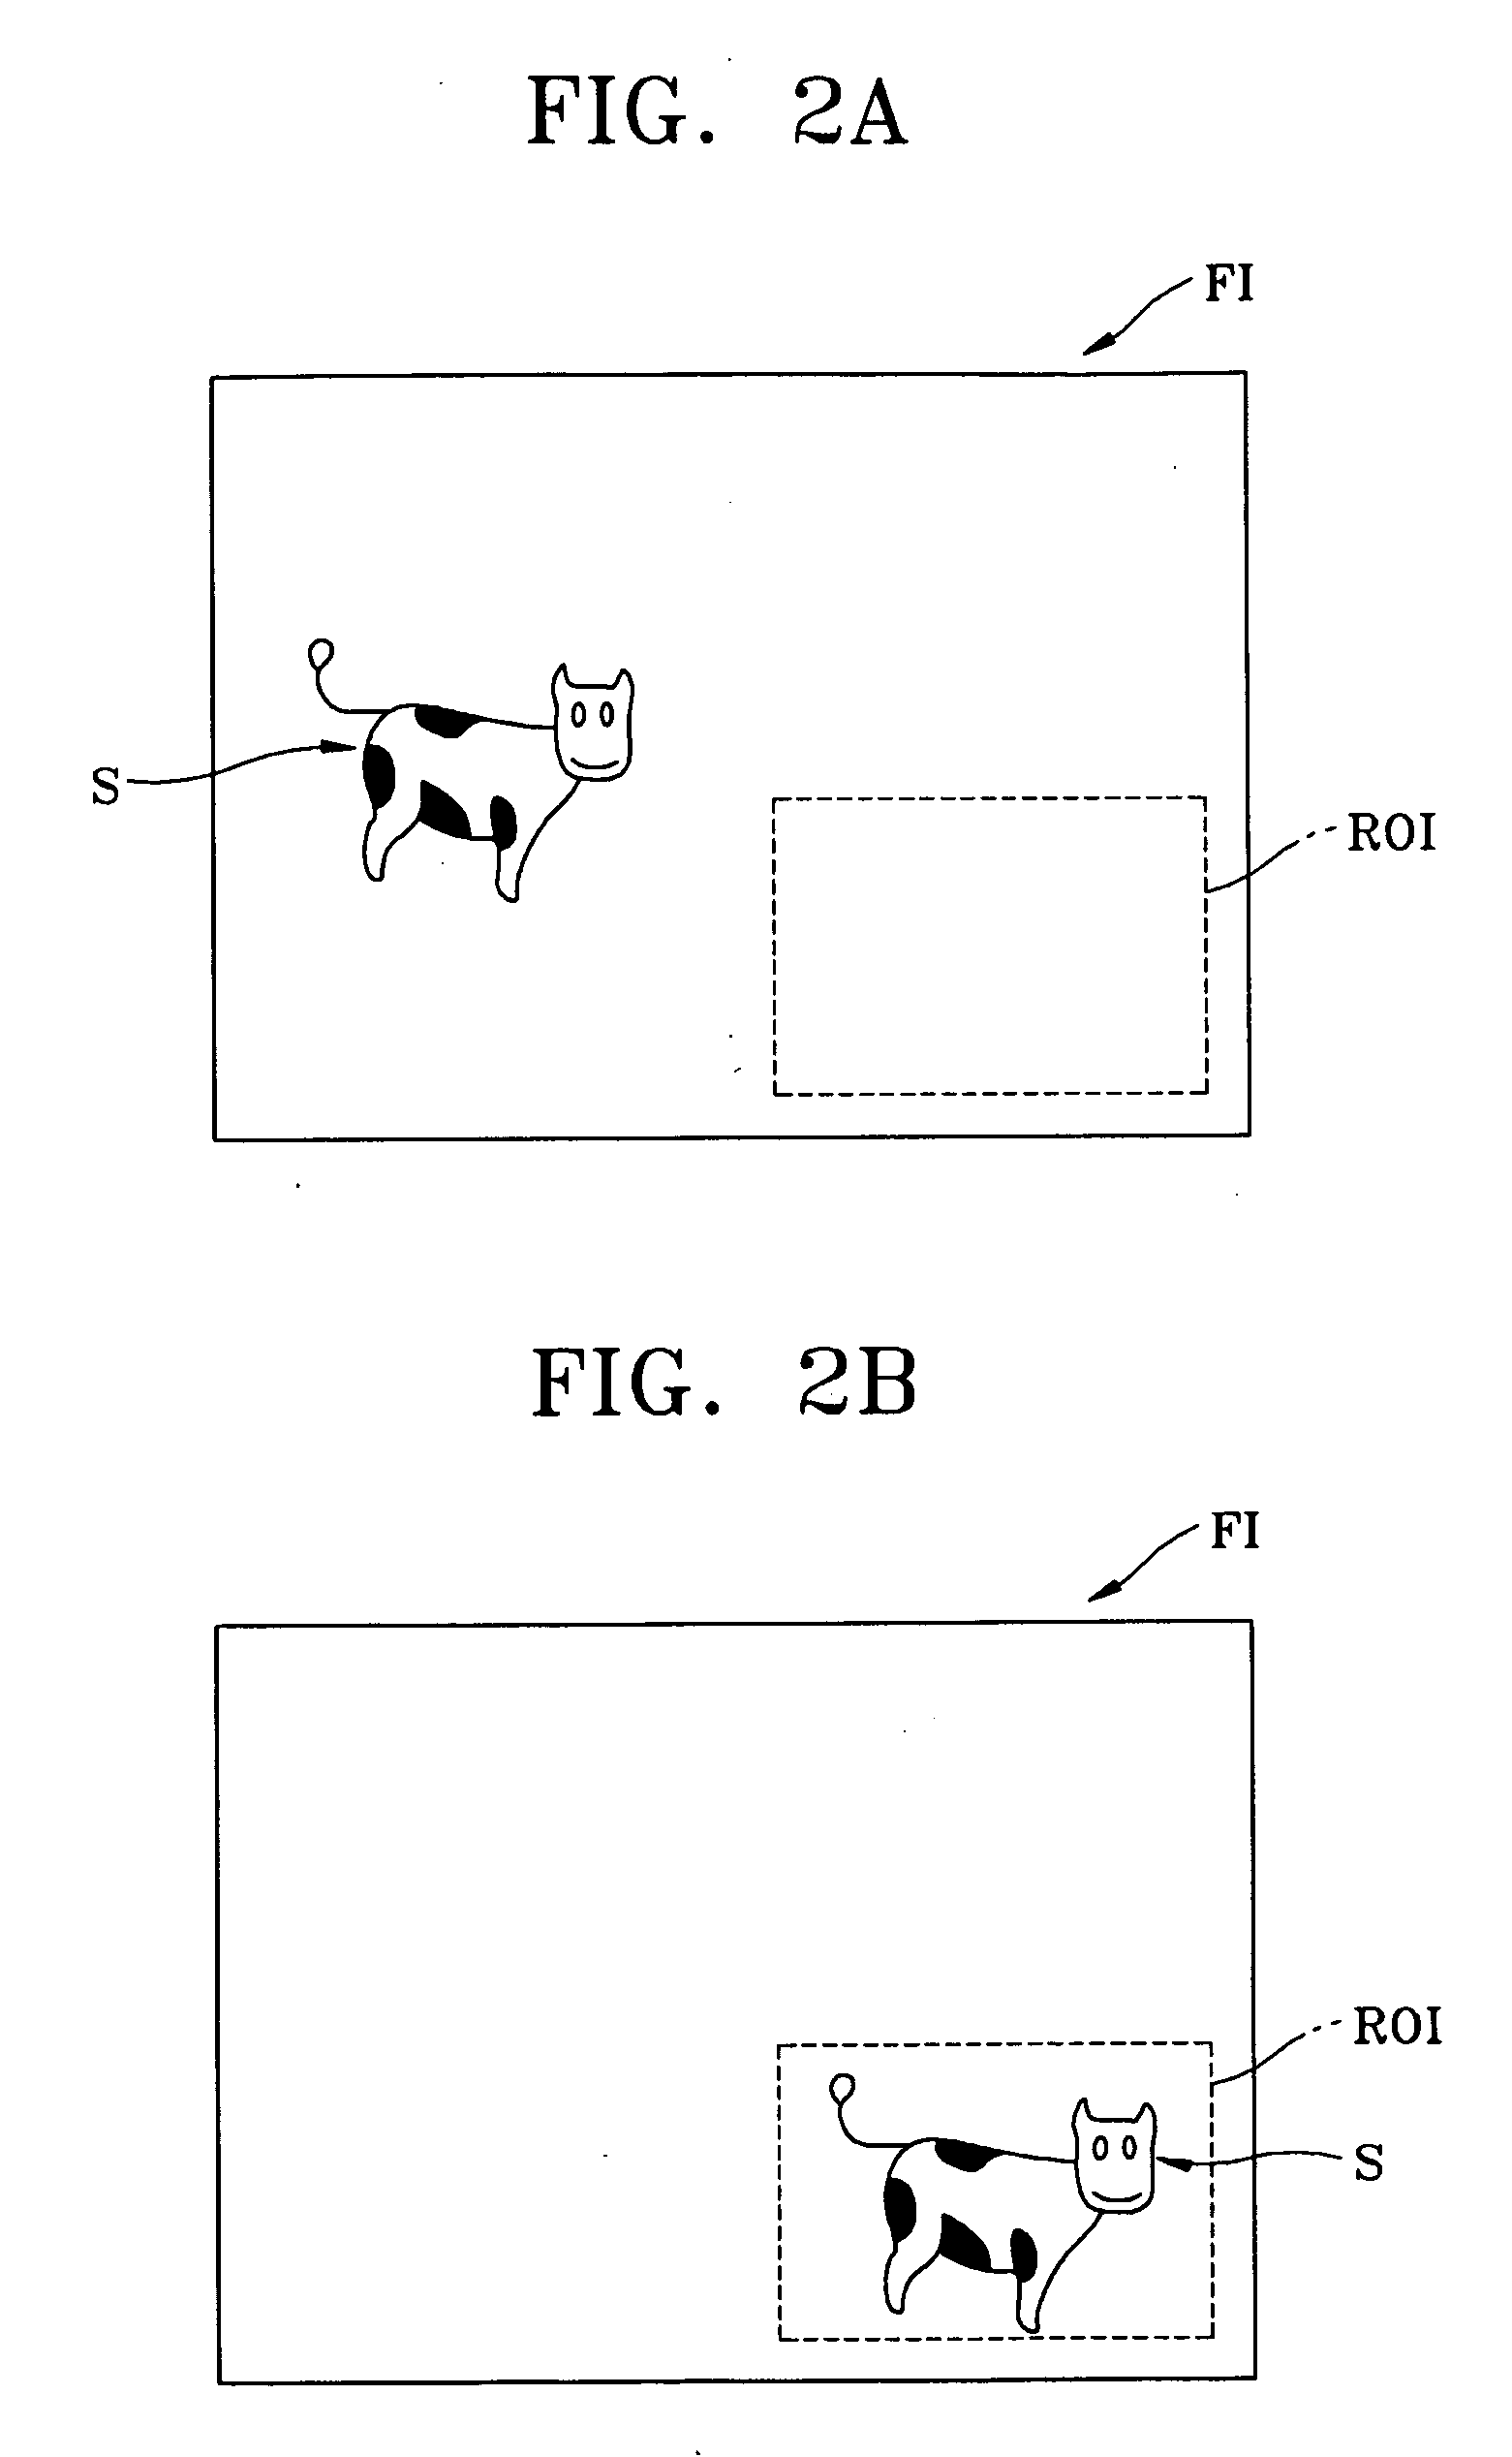 Digital image photographing apparatus, method of controlling the apparatus, and recording medium having program for executing the method